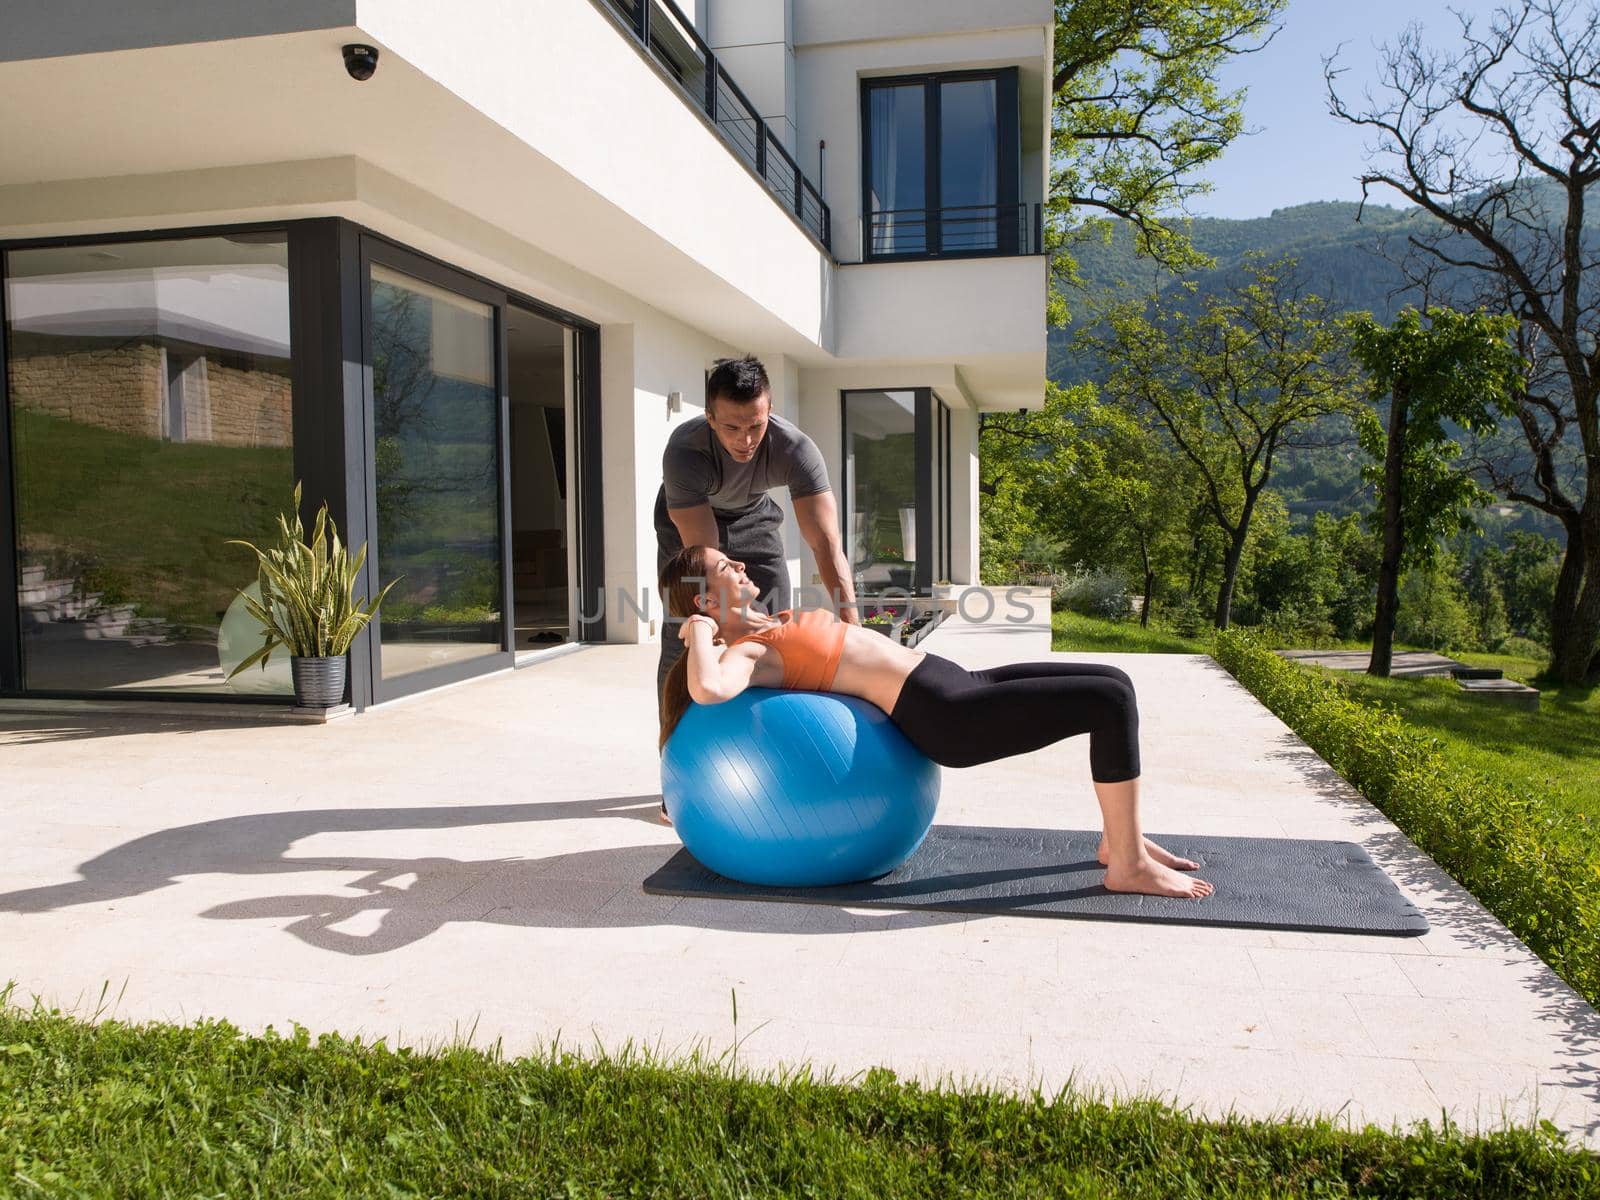 young beautiful woman and personal trainer doing exercise with pilates ball in front of her luxury home